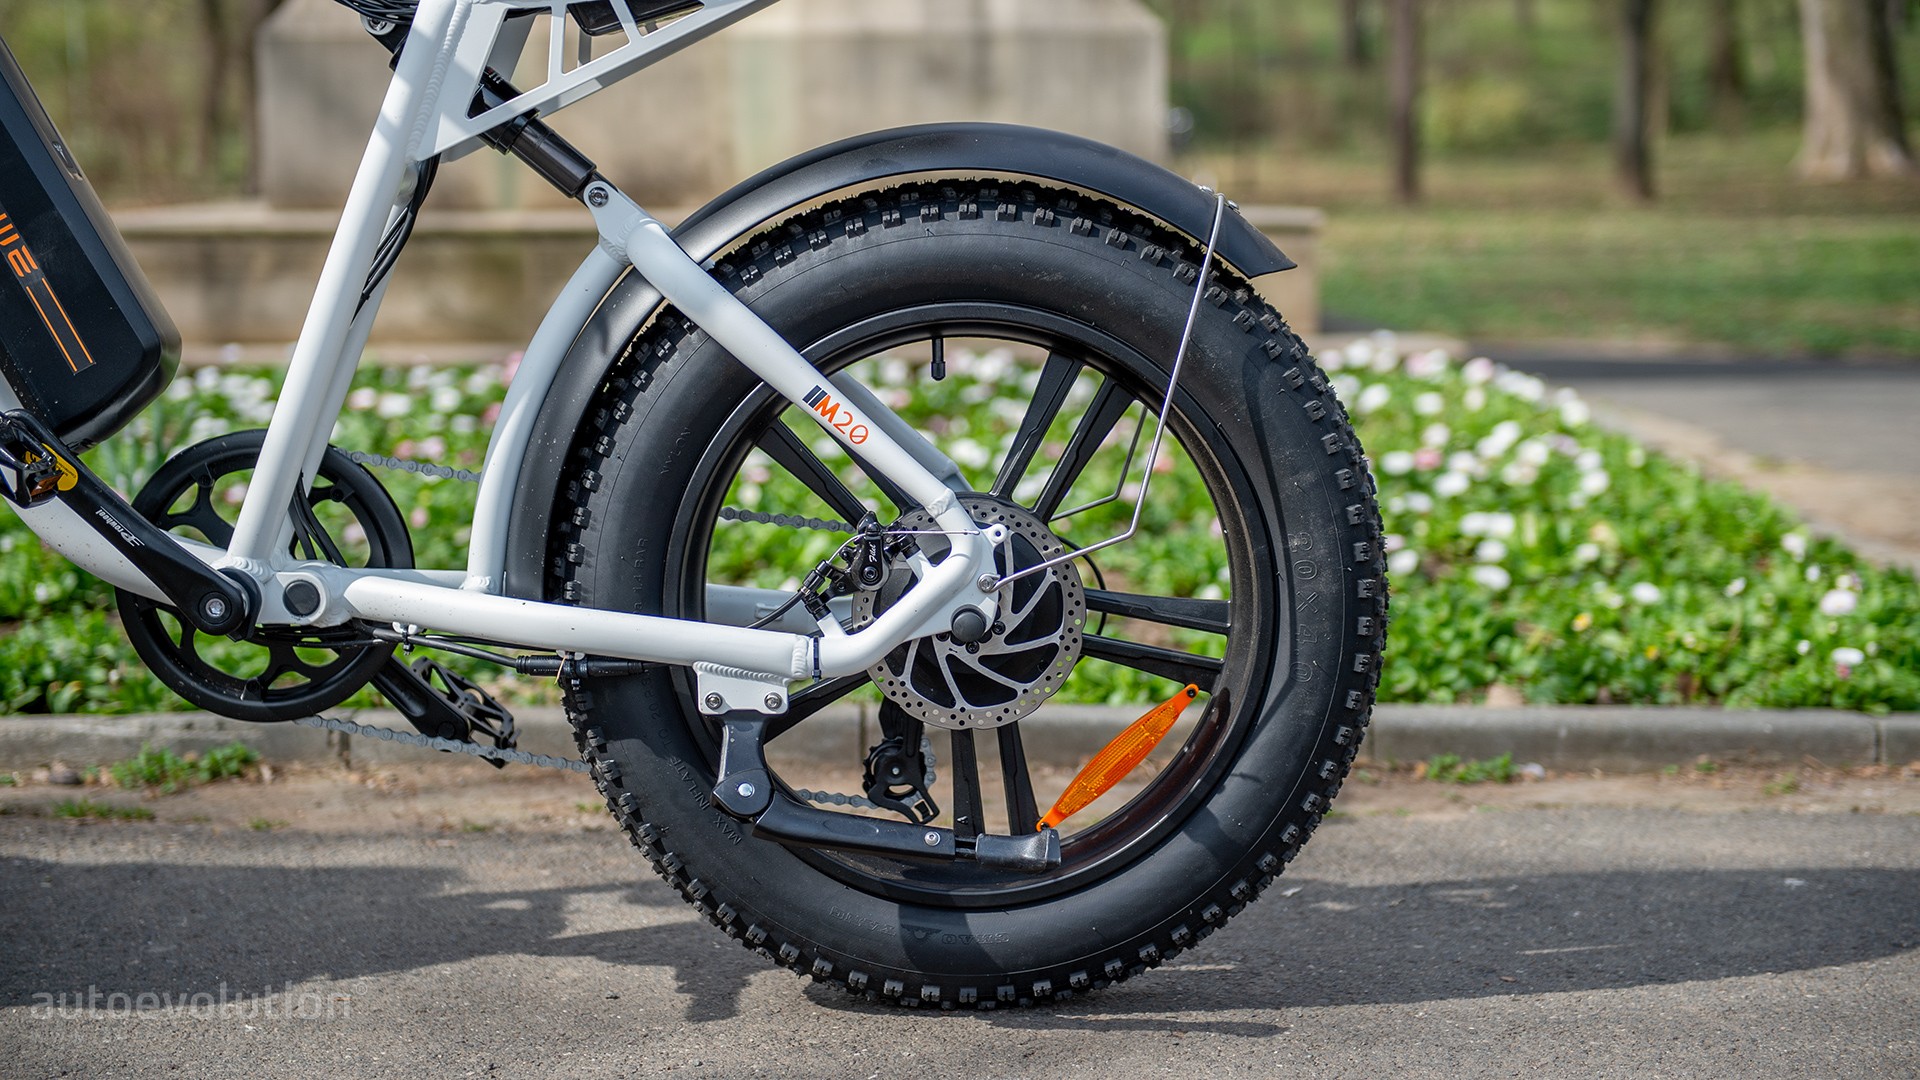 Engwe M20 ebike review: Fewer adjustment capabilities with solid motor  power - General Discussion Discussions on AppleInsider Forums